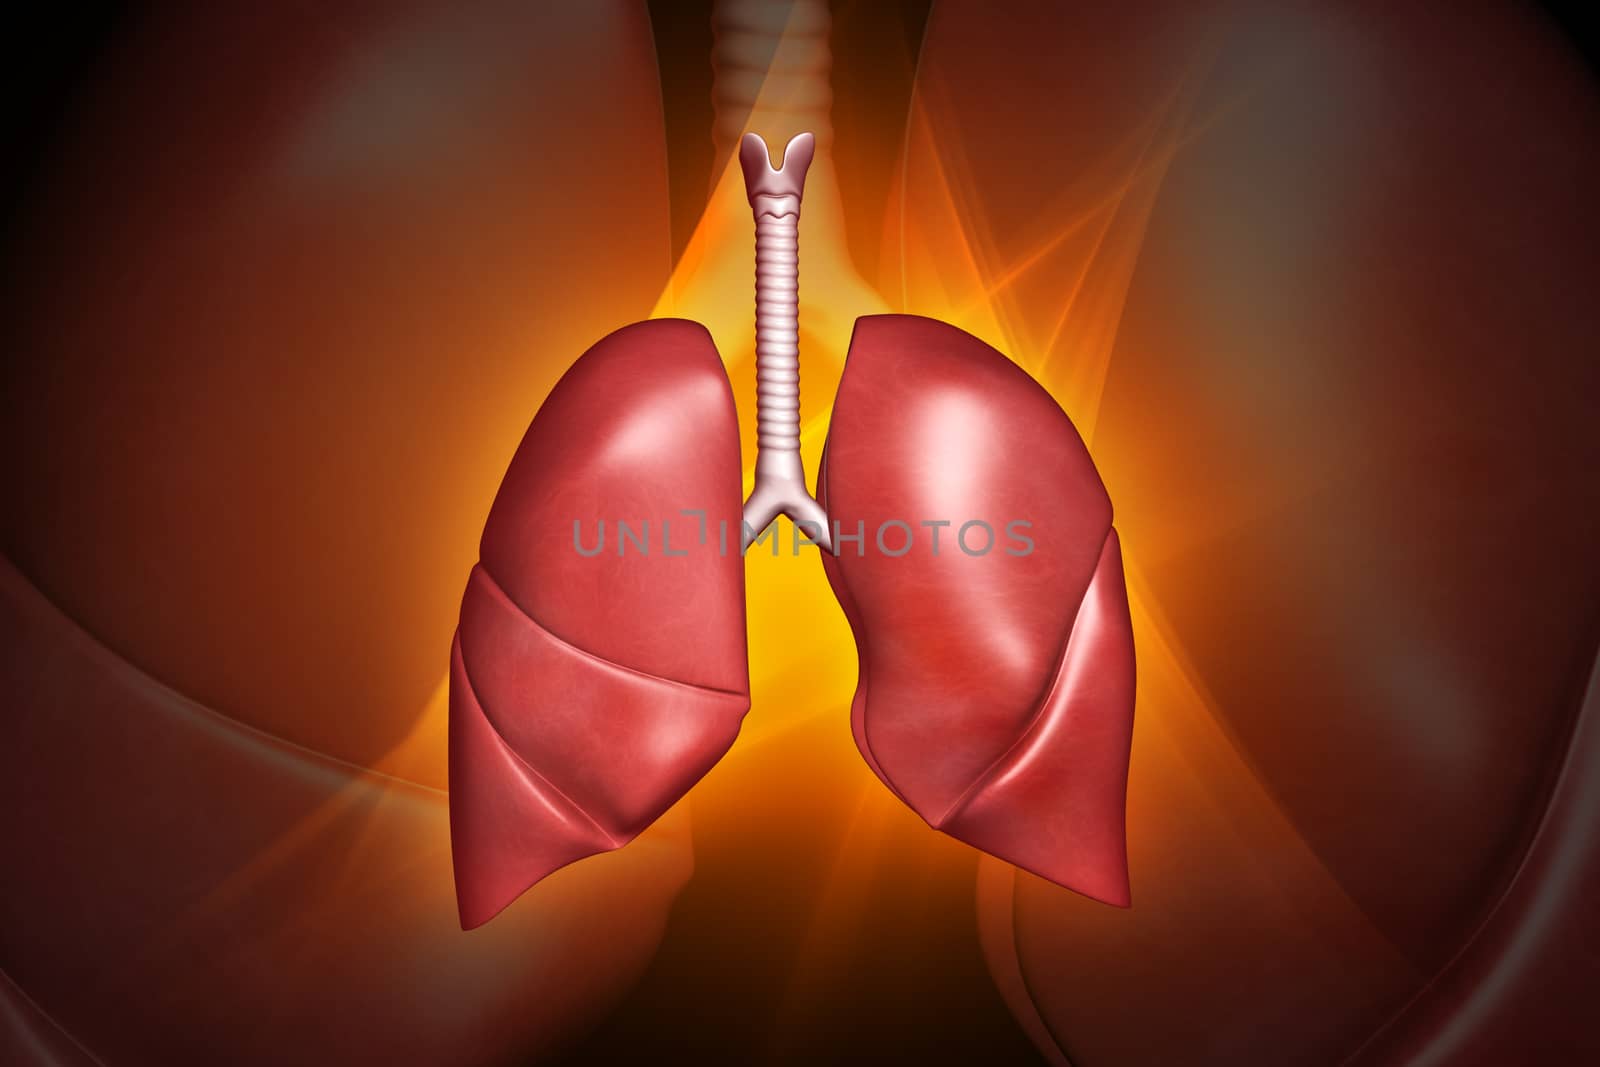 digital illustration of a Human lungs